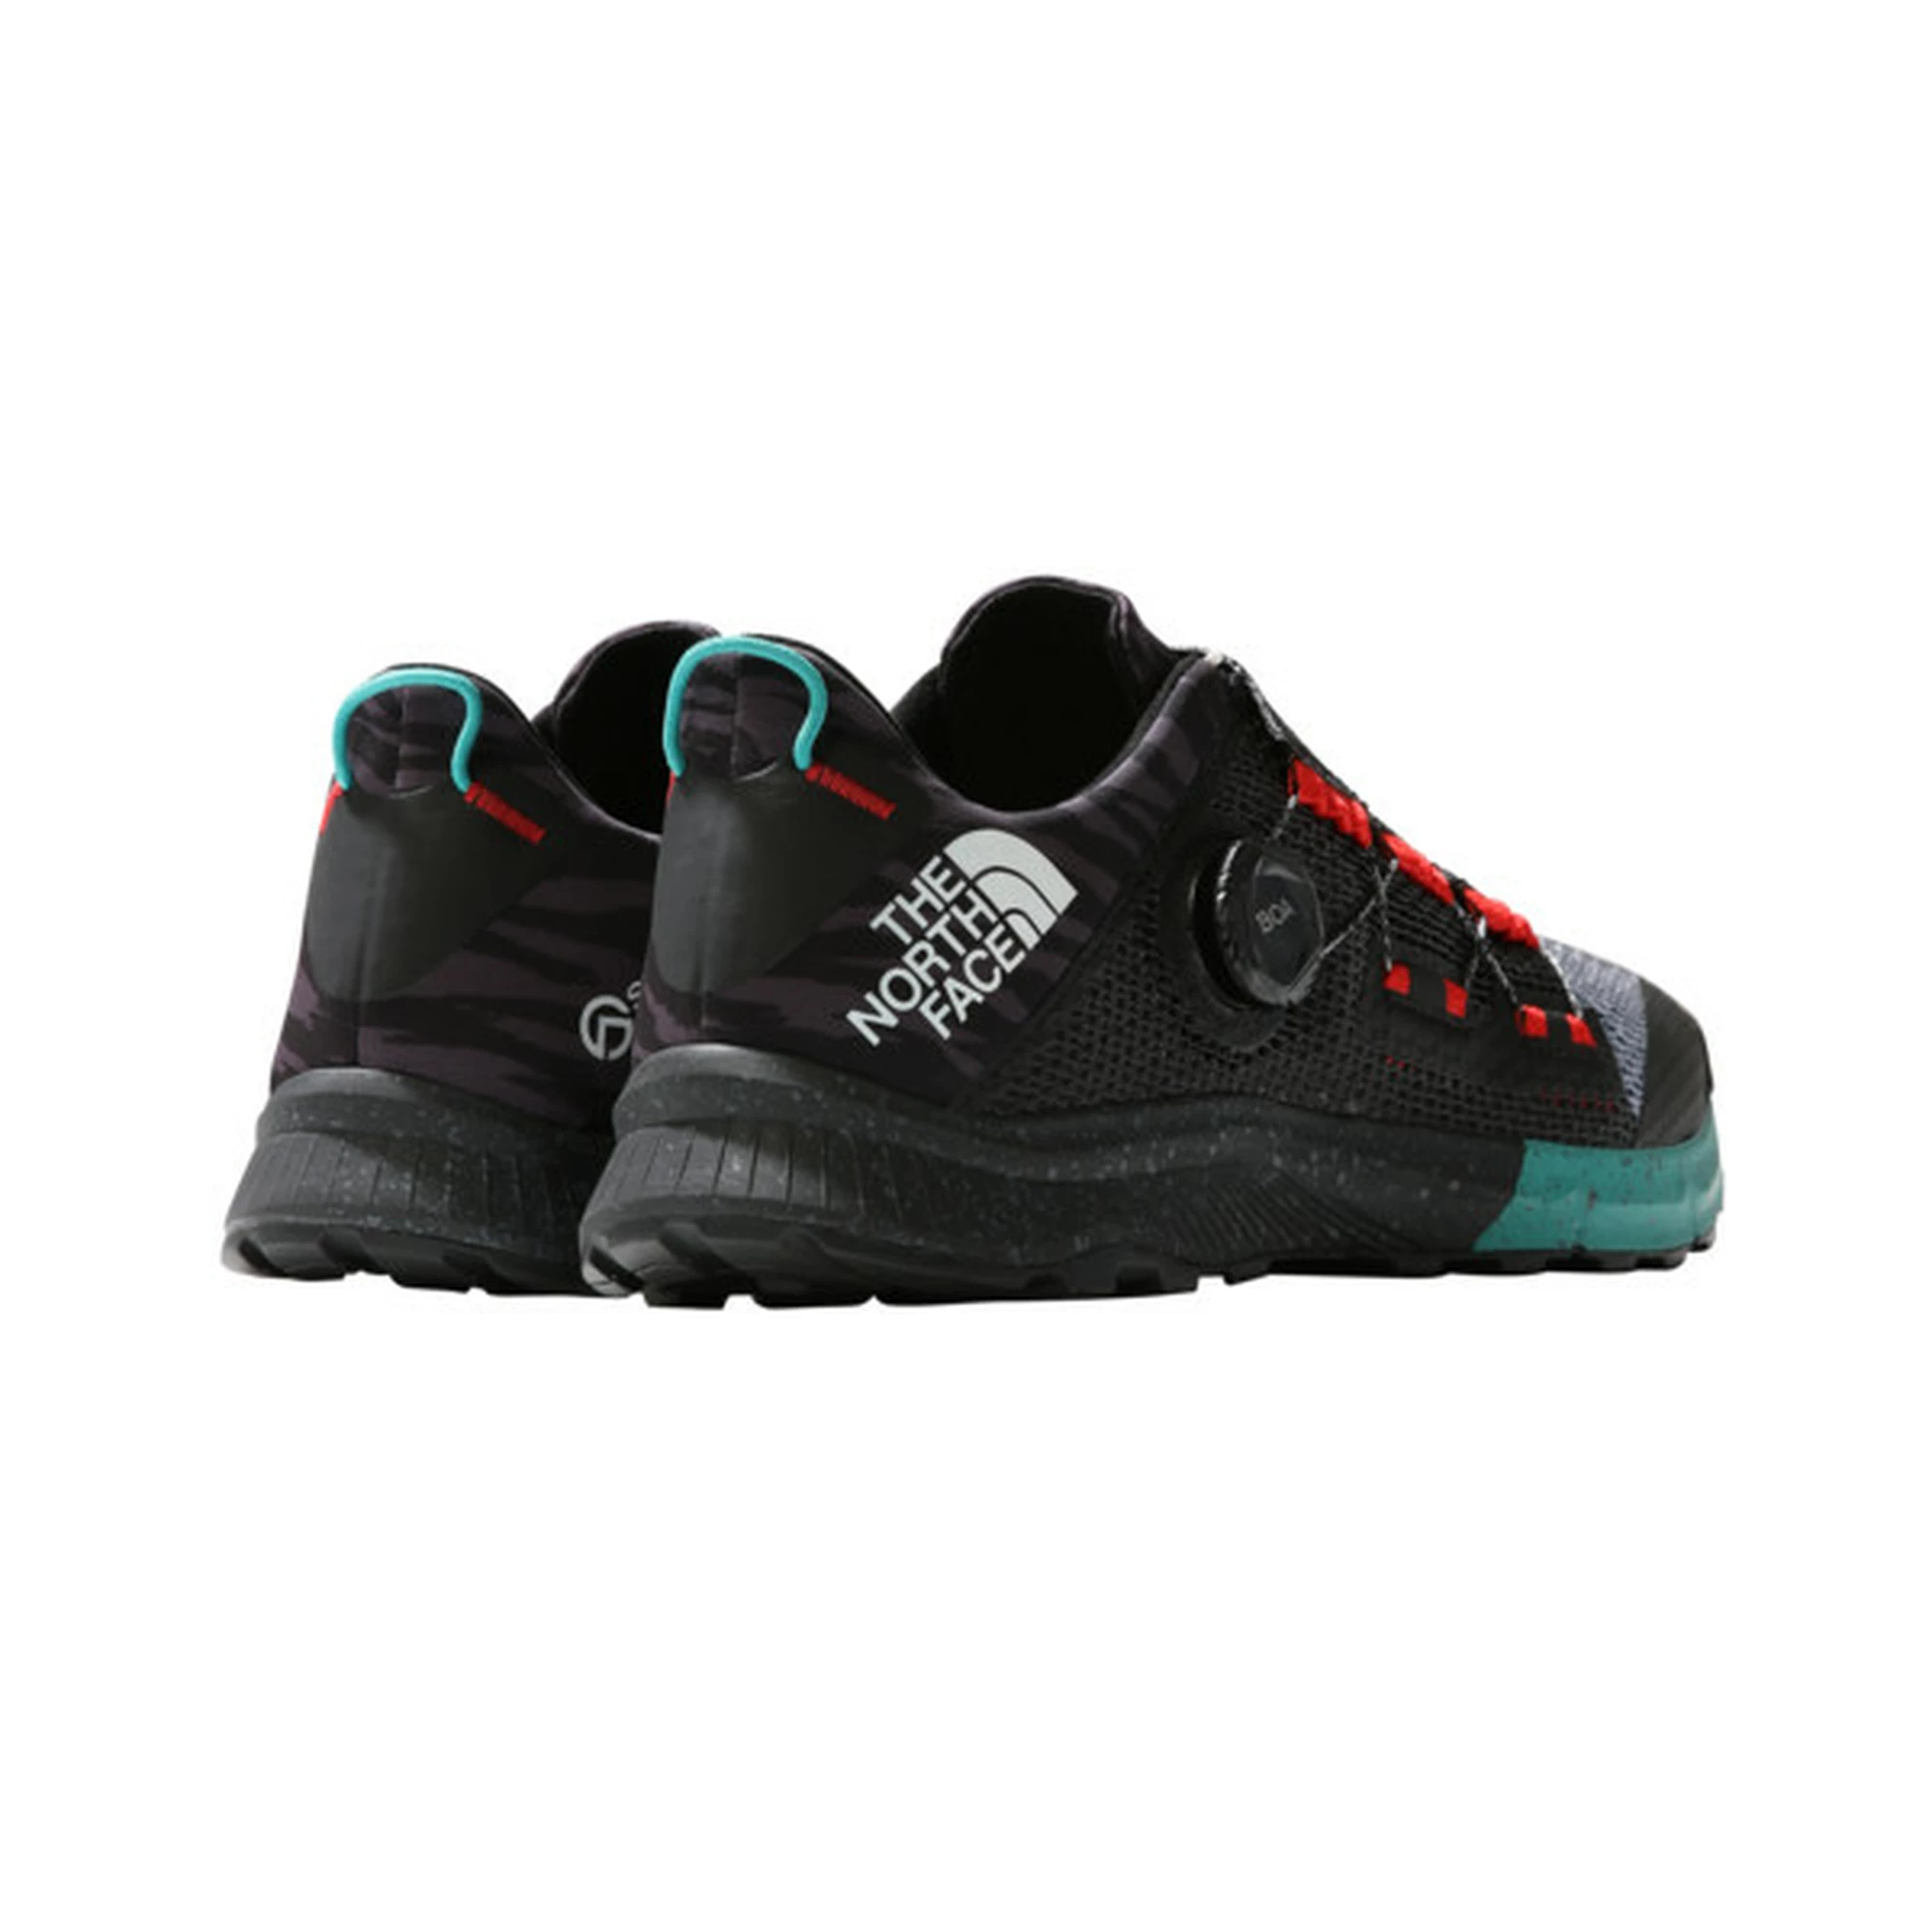 The North Face Summit Cragstone Pro